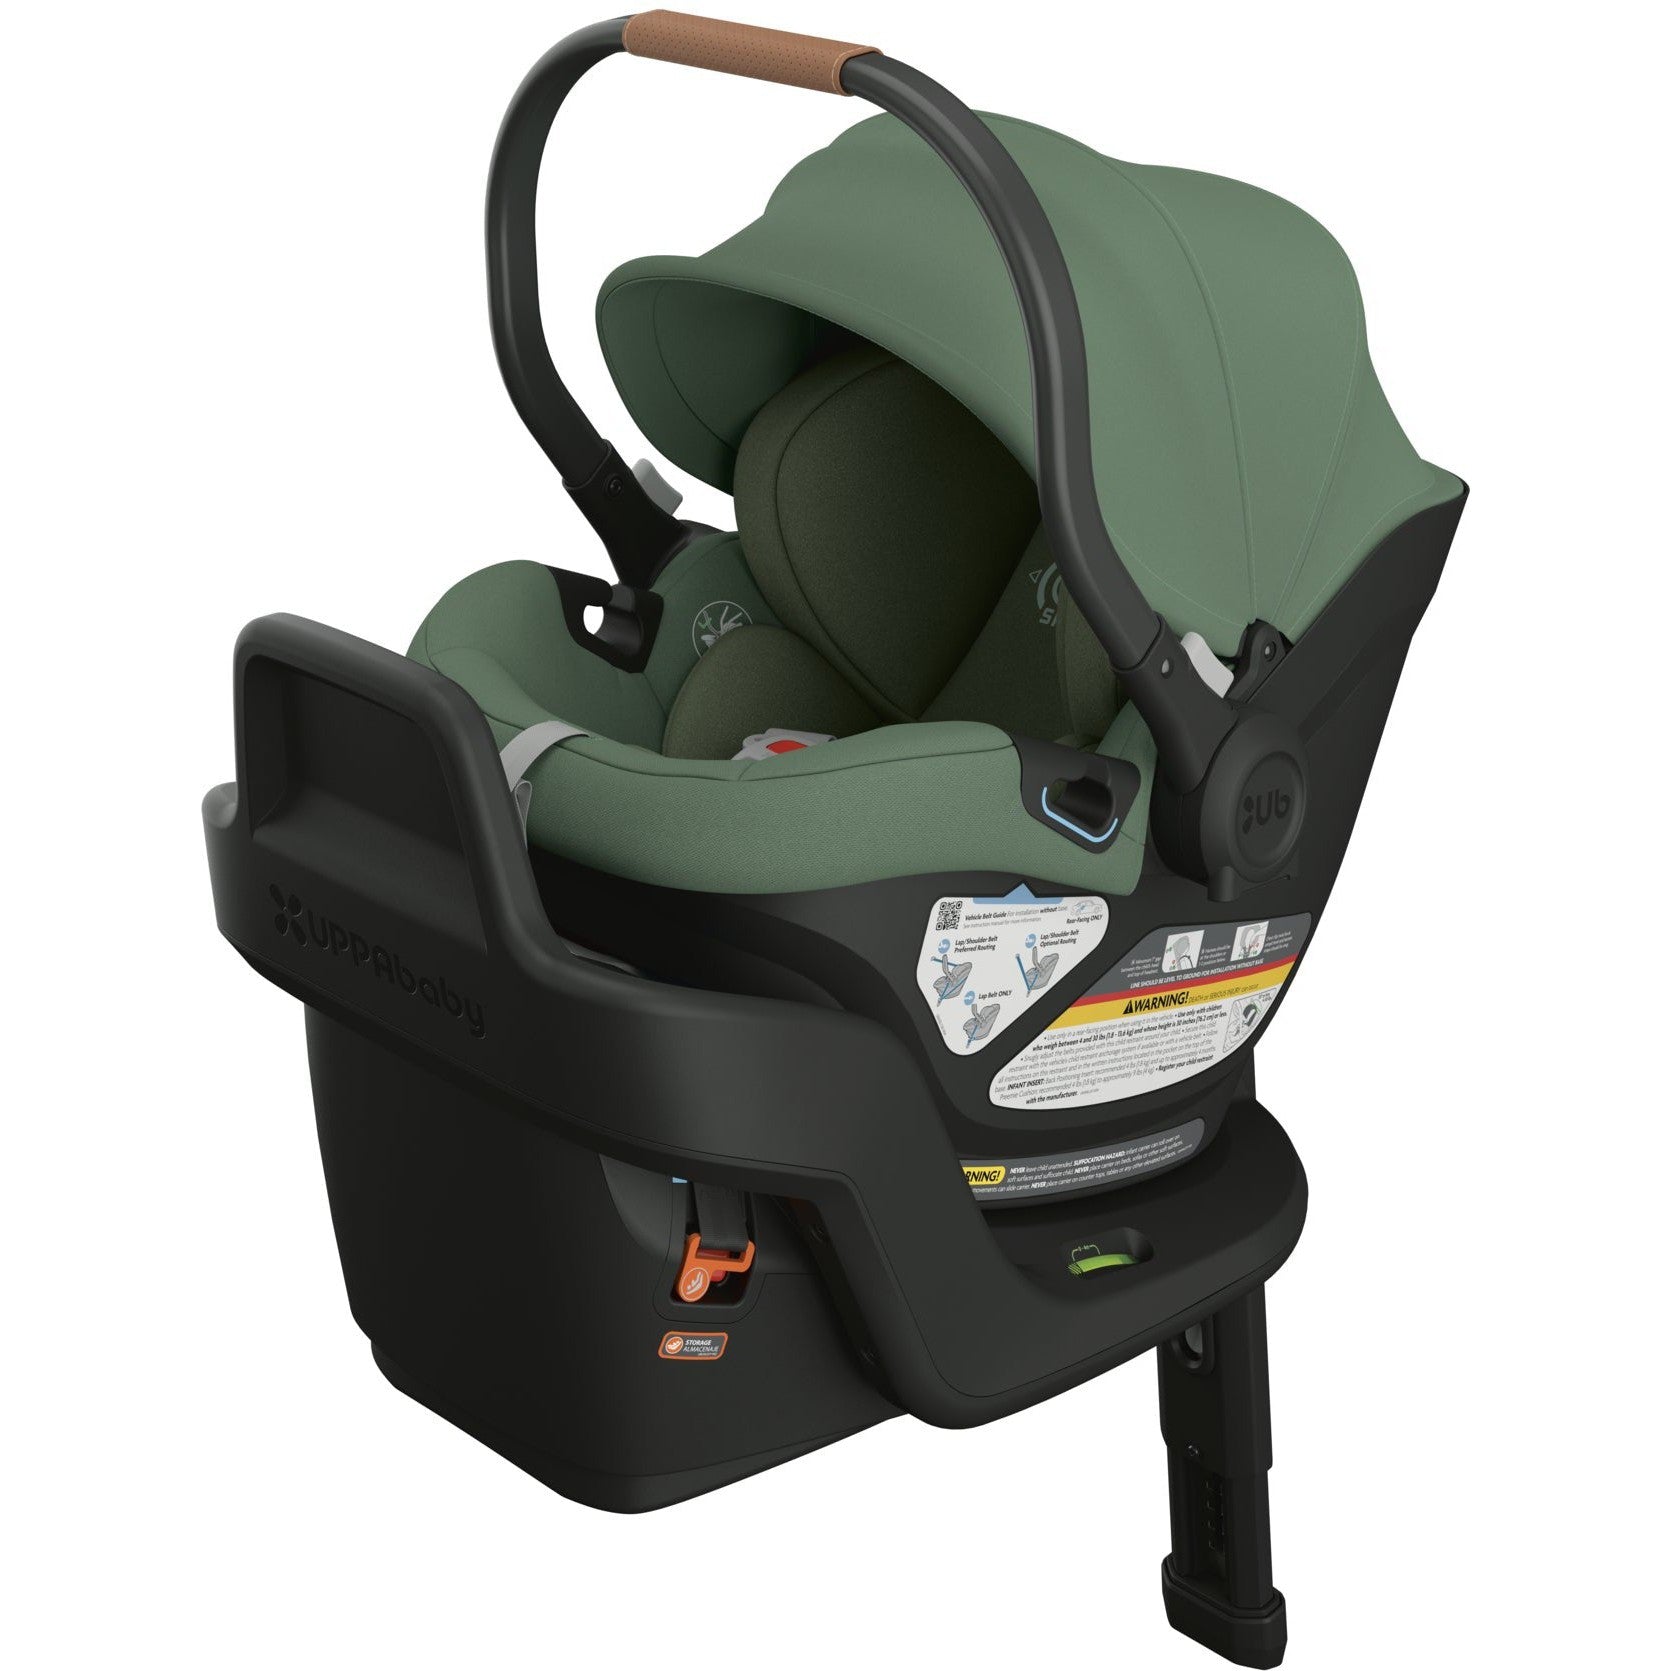 Buy gwen-green-saddle-leather UPPAbaby Aria Lightweight Infant Car Seat + Base